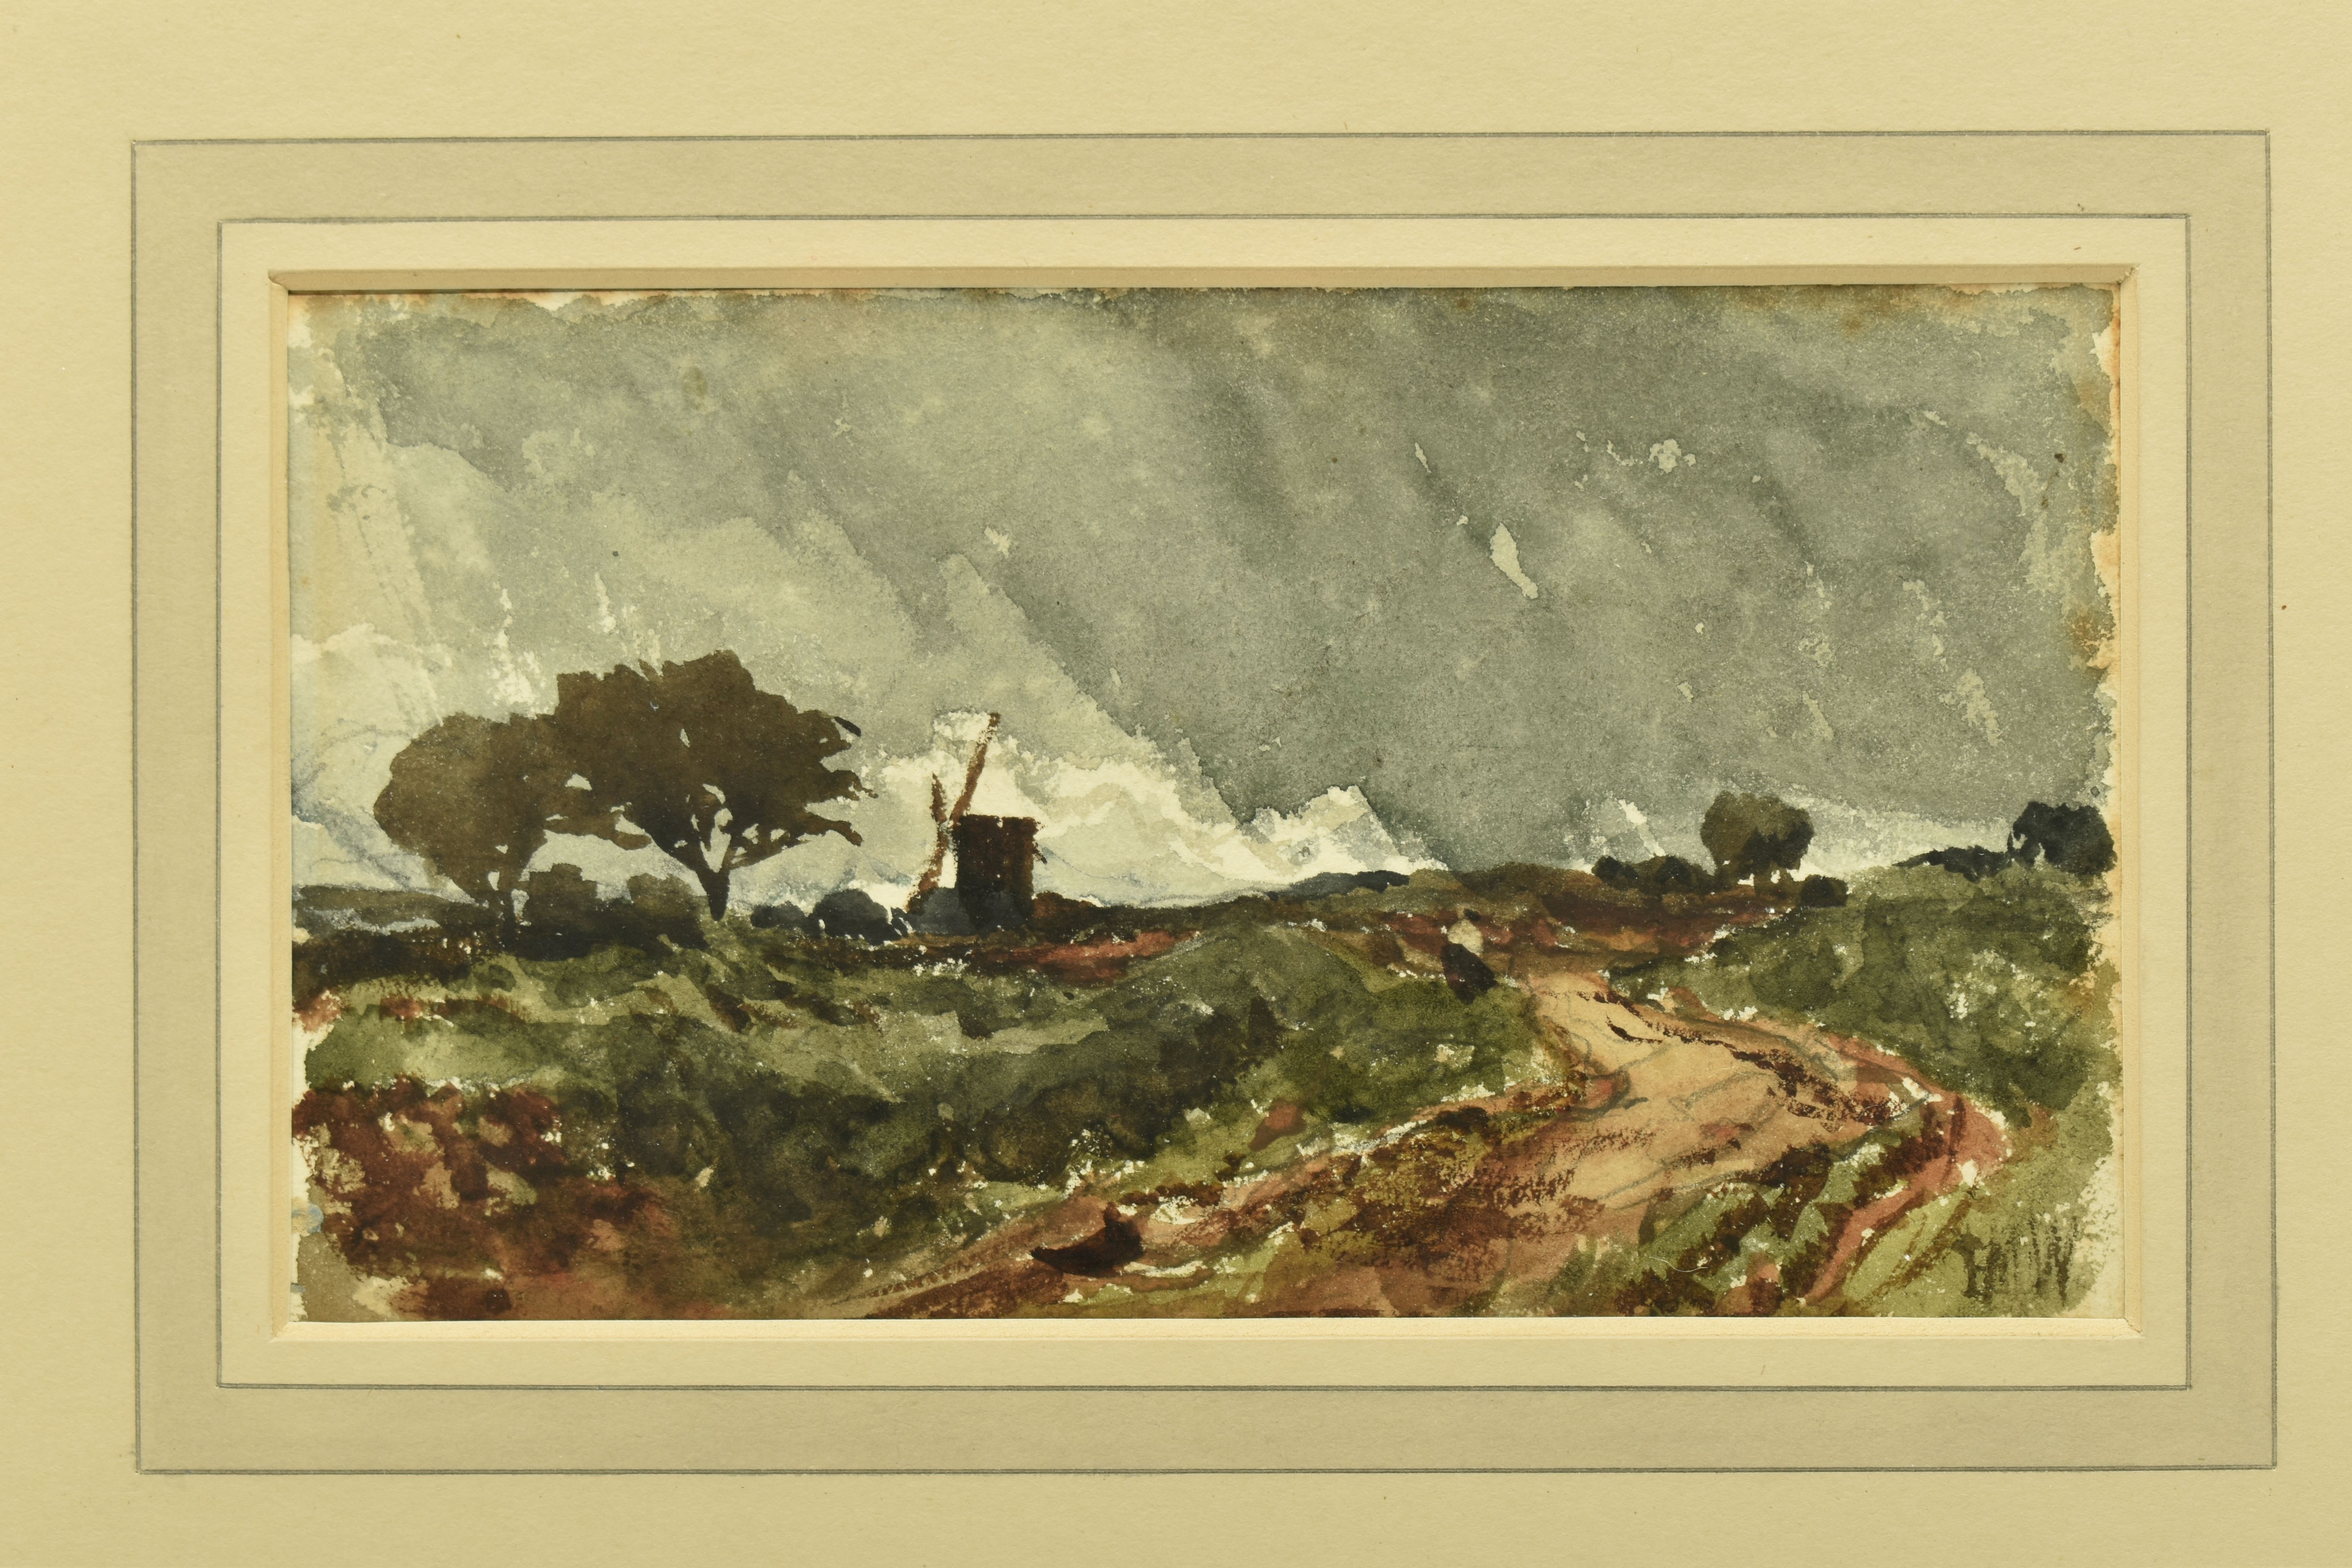 EDMUND MORISON WIMPERIS (1835-1900) STORMY LANDSCAPE WITH WINDMILL, a landscape study with - Image 2 of 5